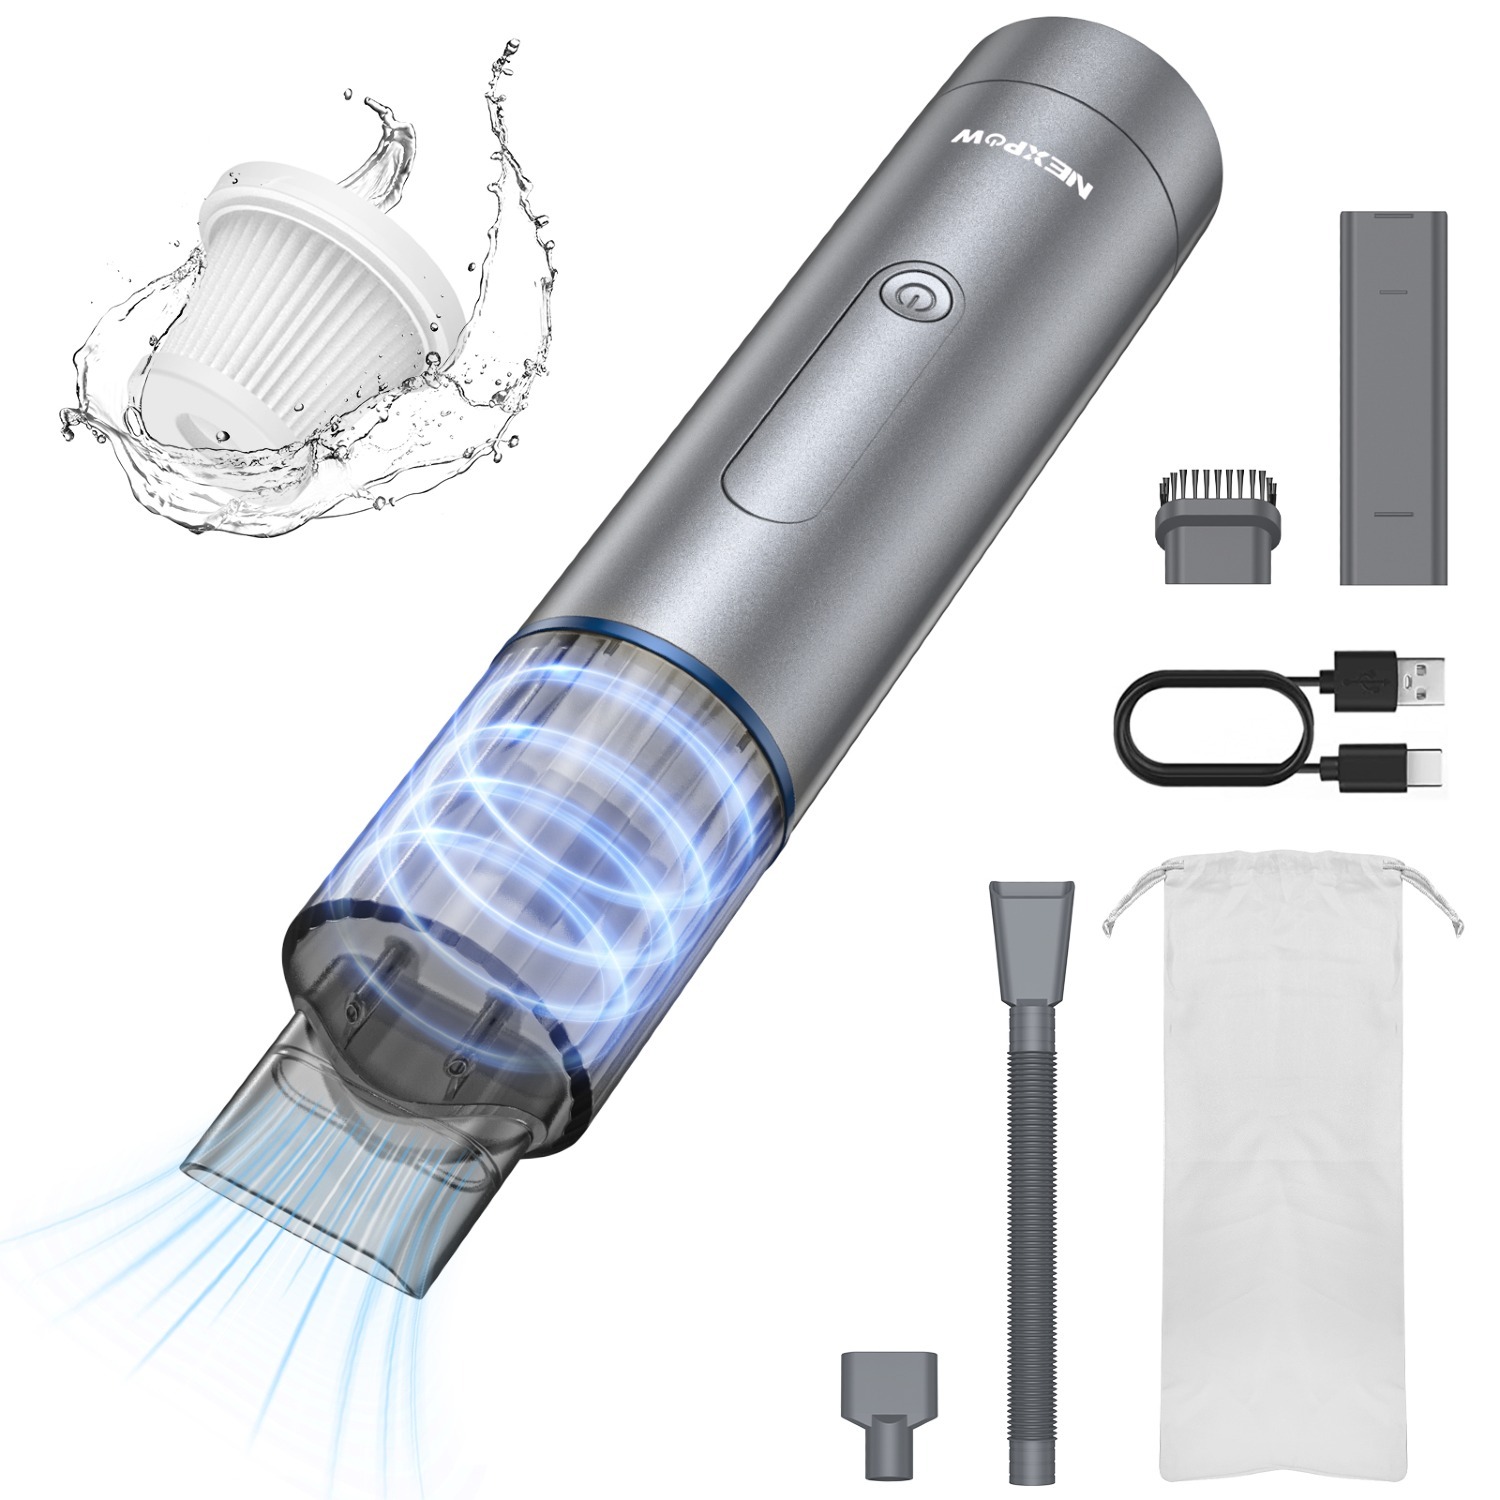 NEXPOW Portable 7000PA Handheld Car Vacuum Cleaner (7500 mAh Battery, Gray) $15 + Free Shipping w/ Prime or $35+ orders